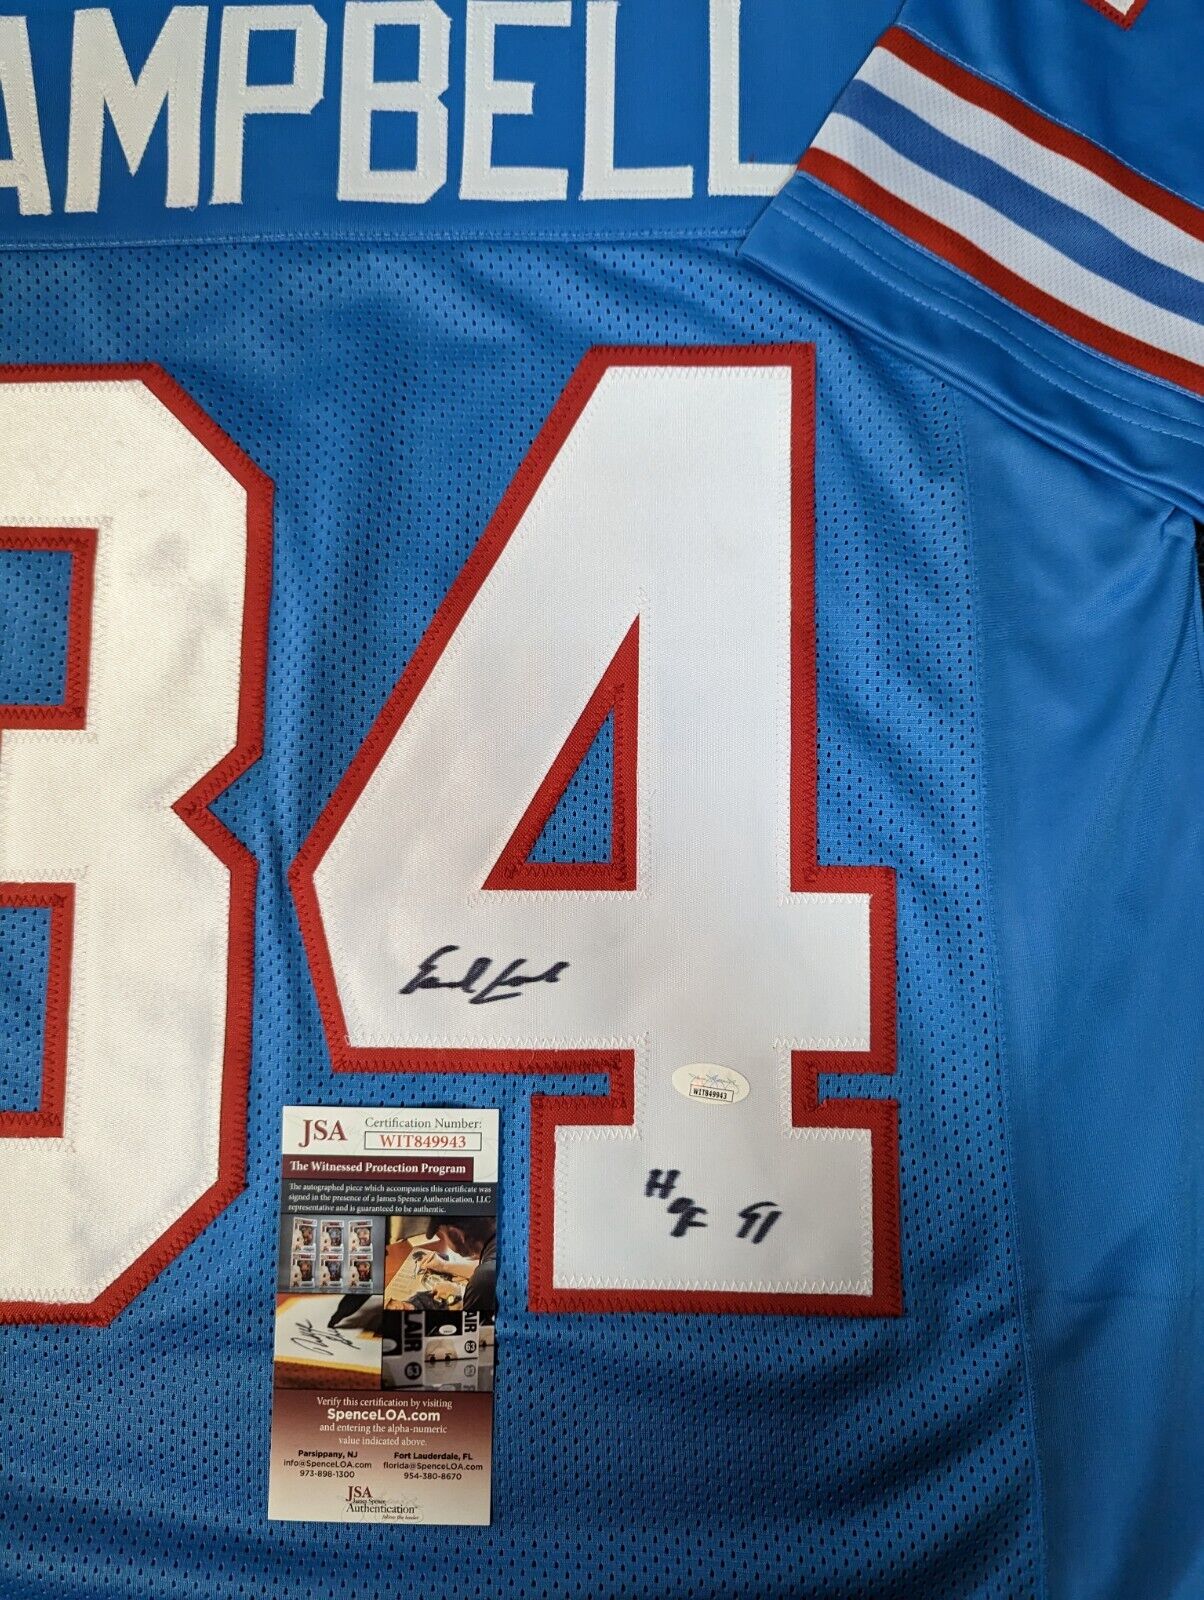 Earl Campbell Autographed and Framed Blue Houston Oilers Jersey